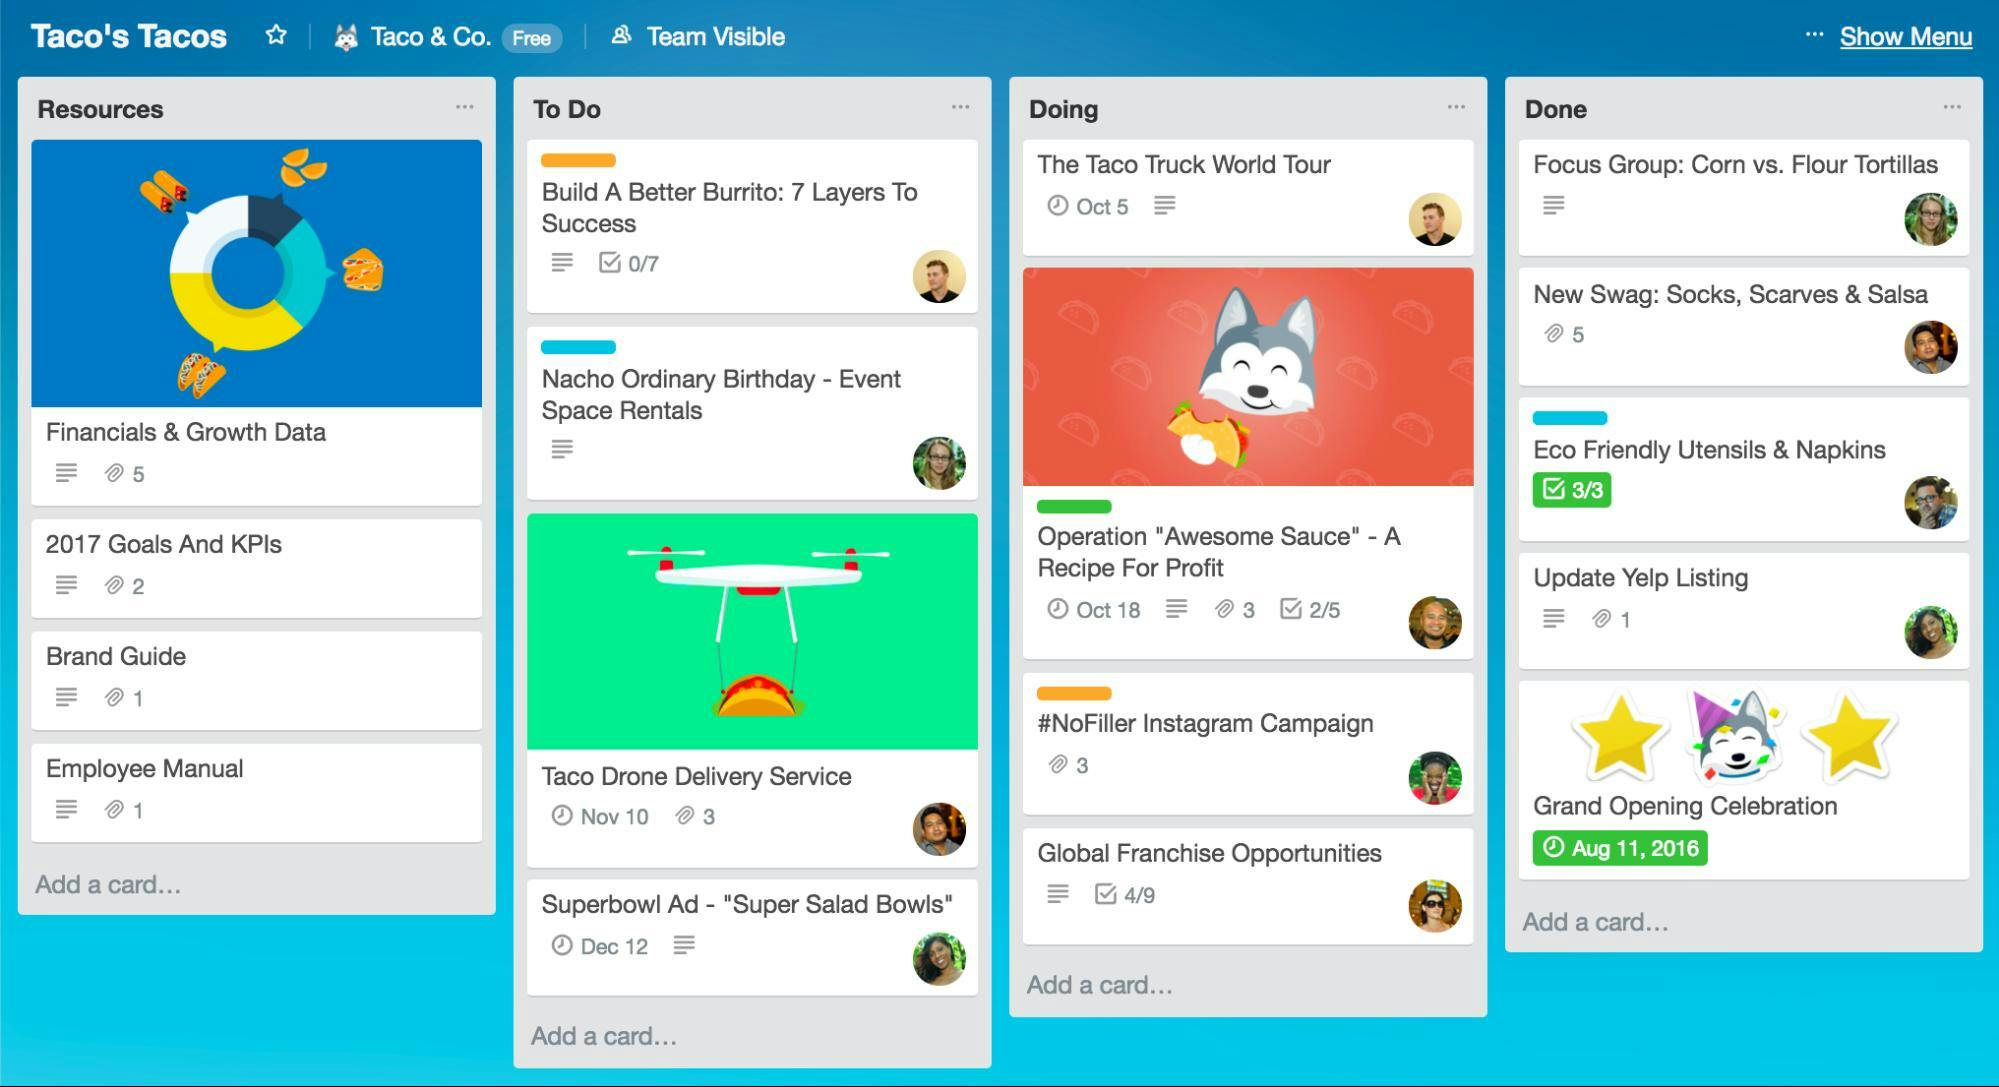 What Is Trello and How Does It Work?